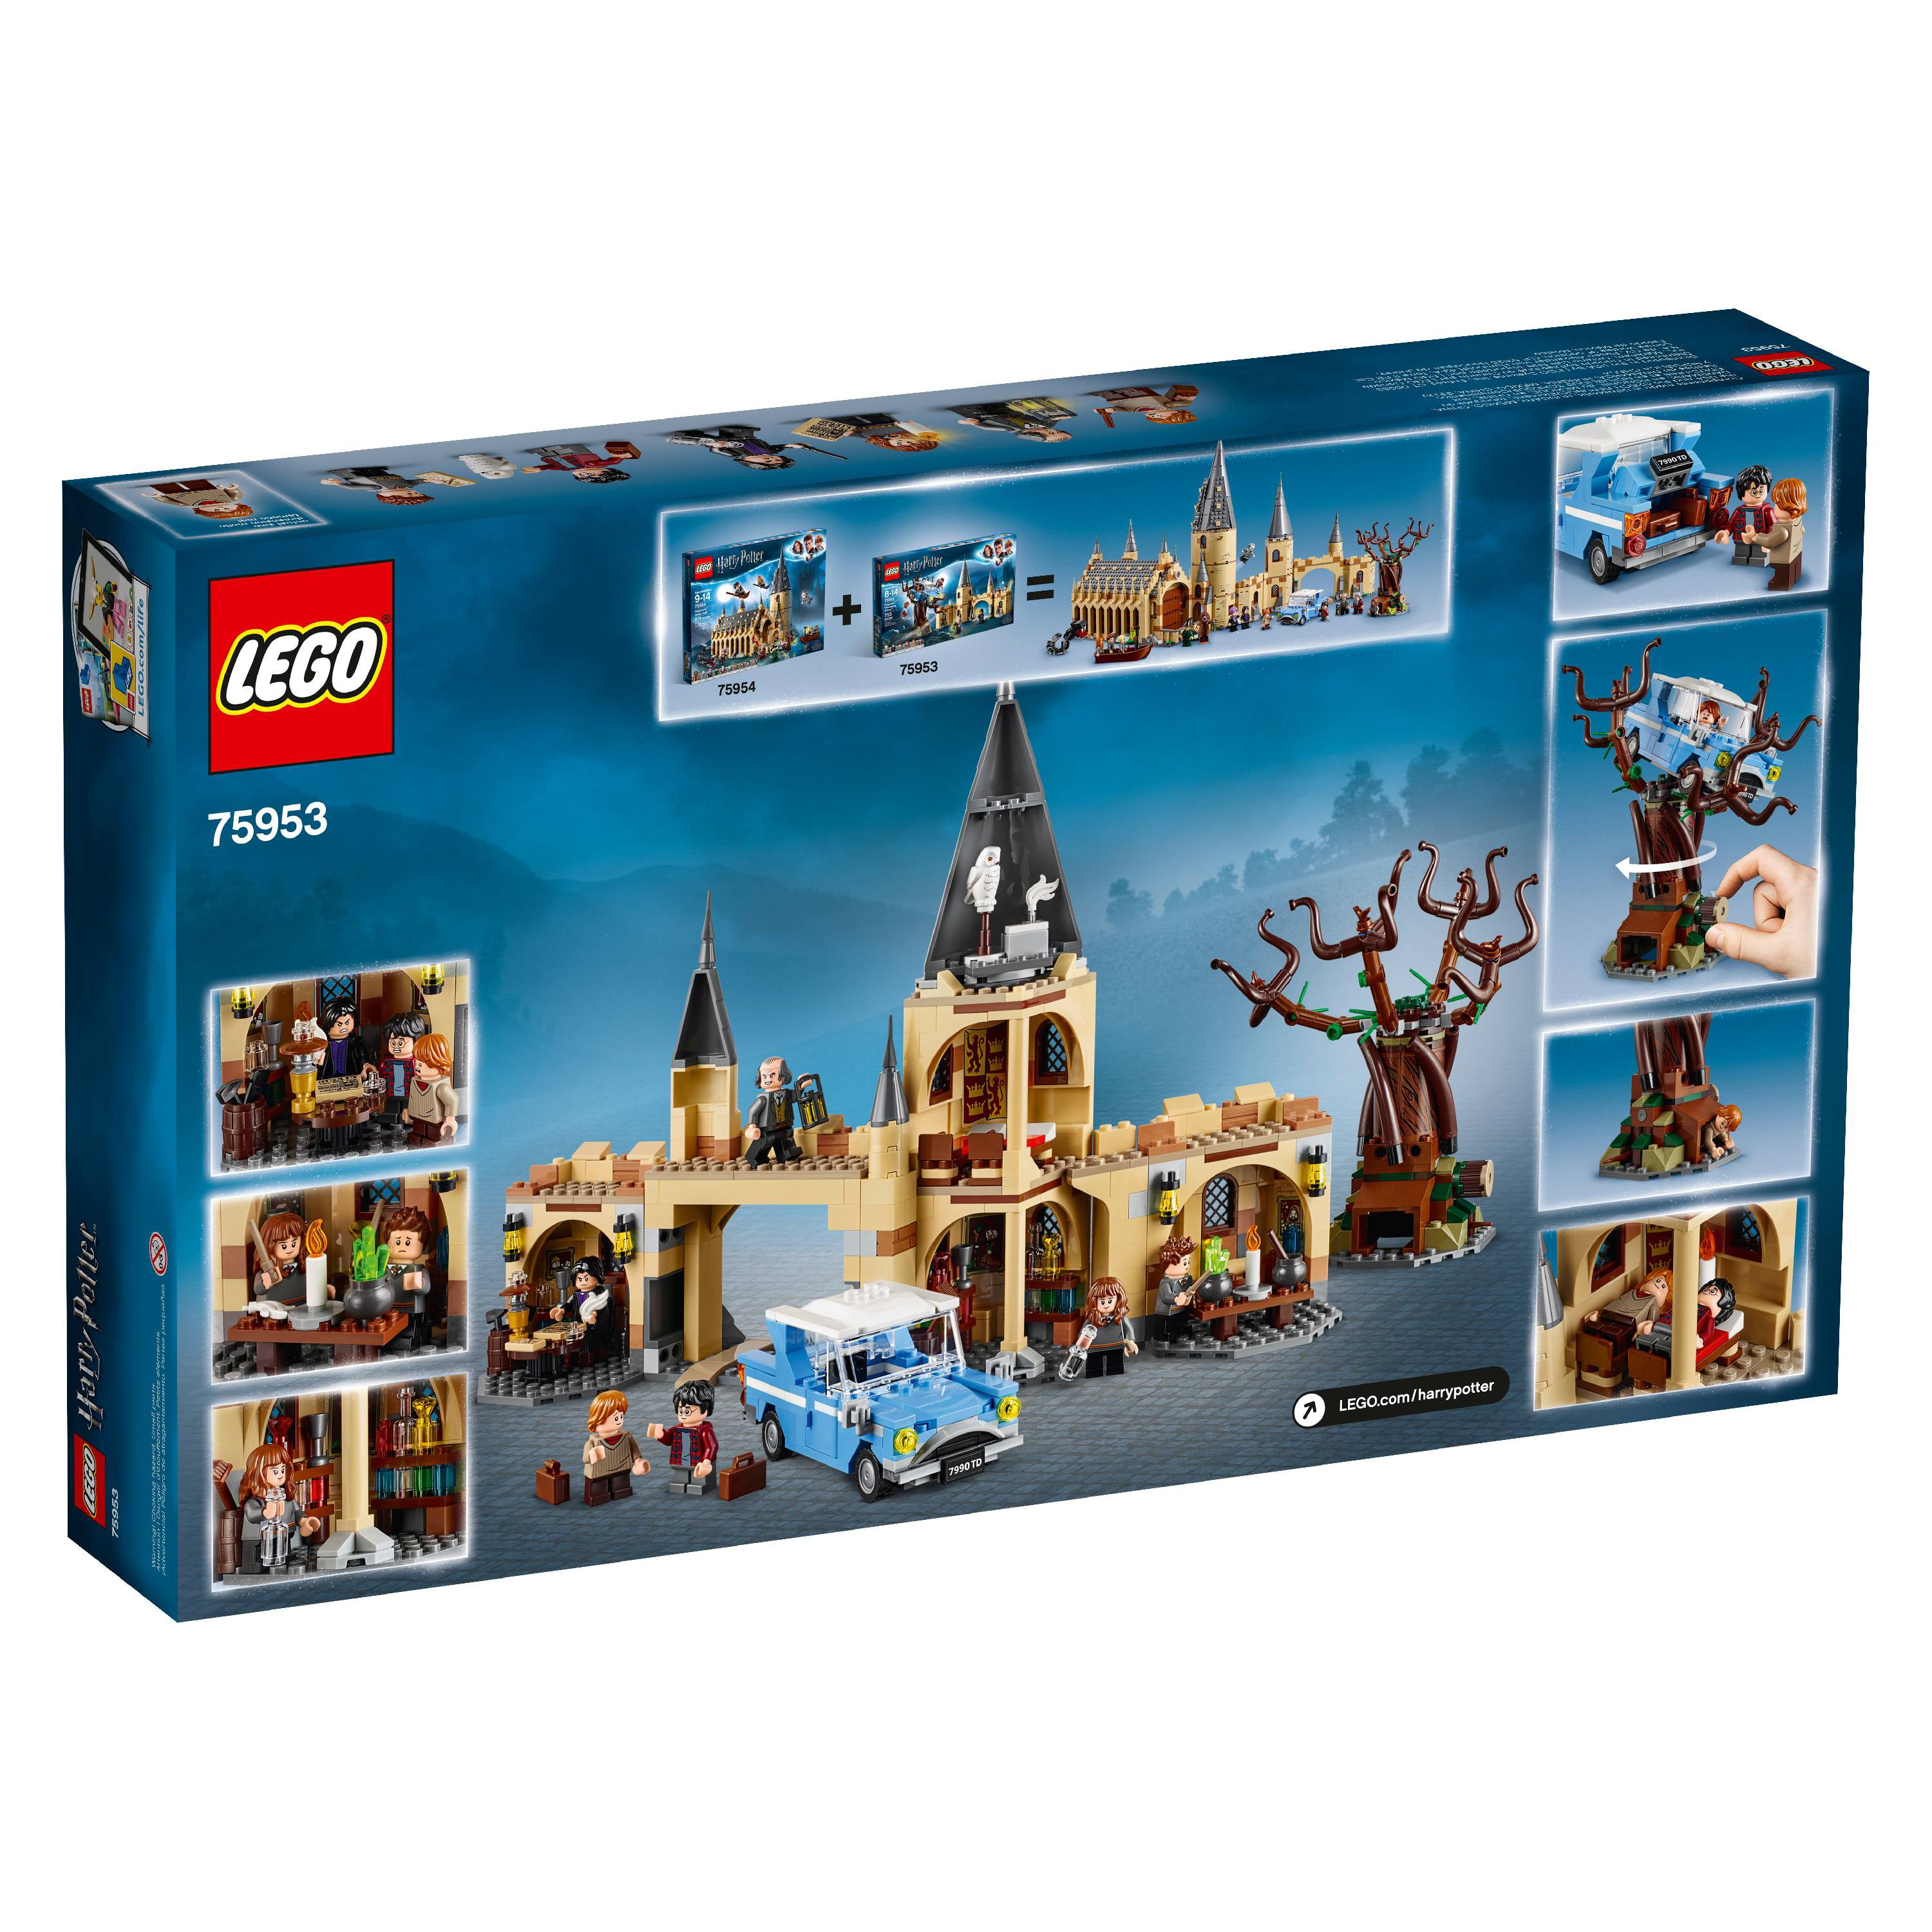 LEGO Harry Potter Hogwarts Whomping Willow 75953 (753 Pieces) -